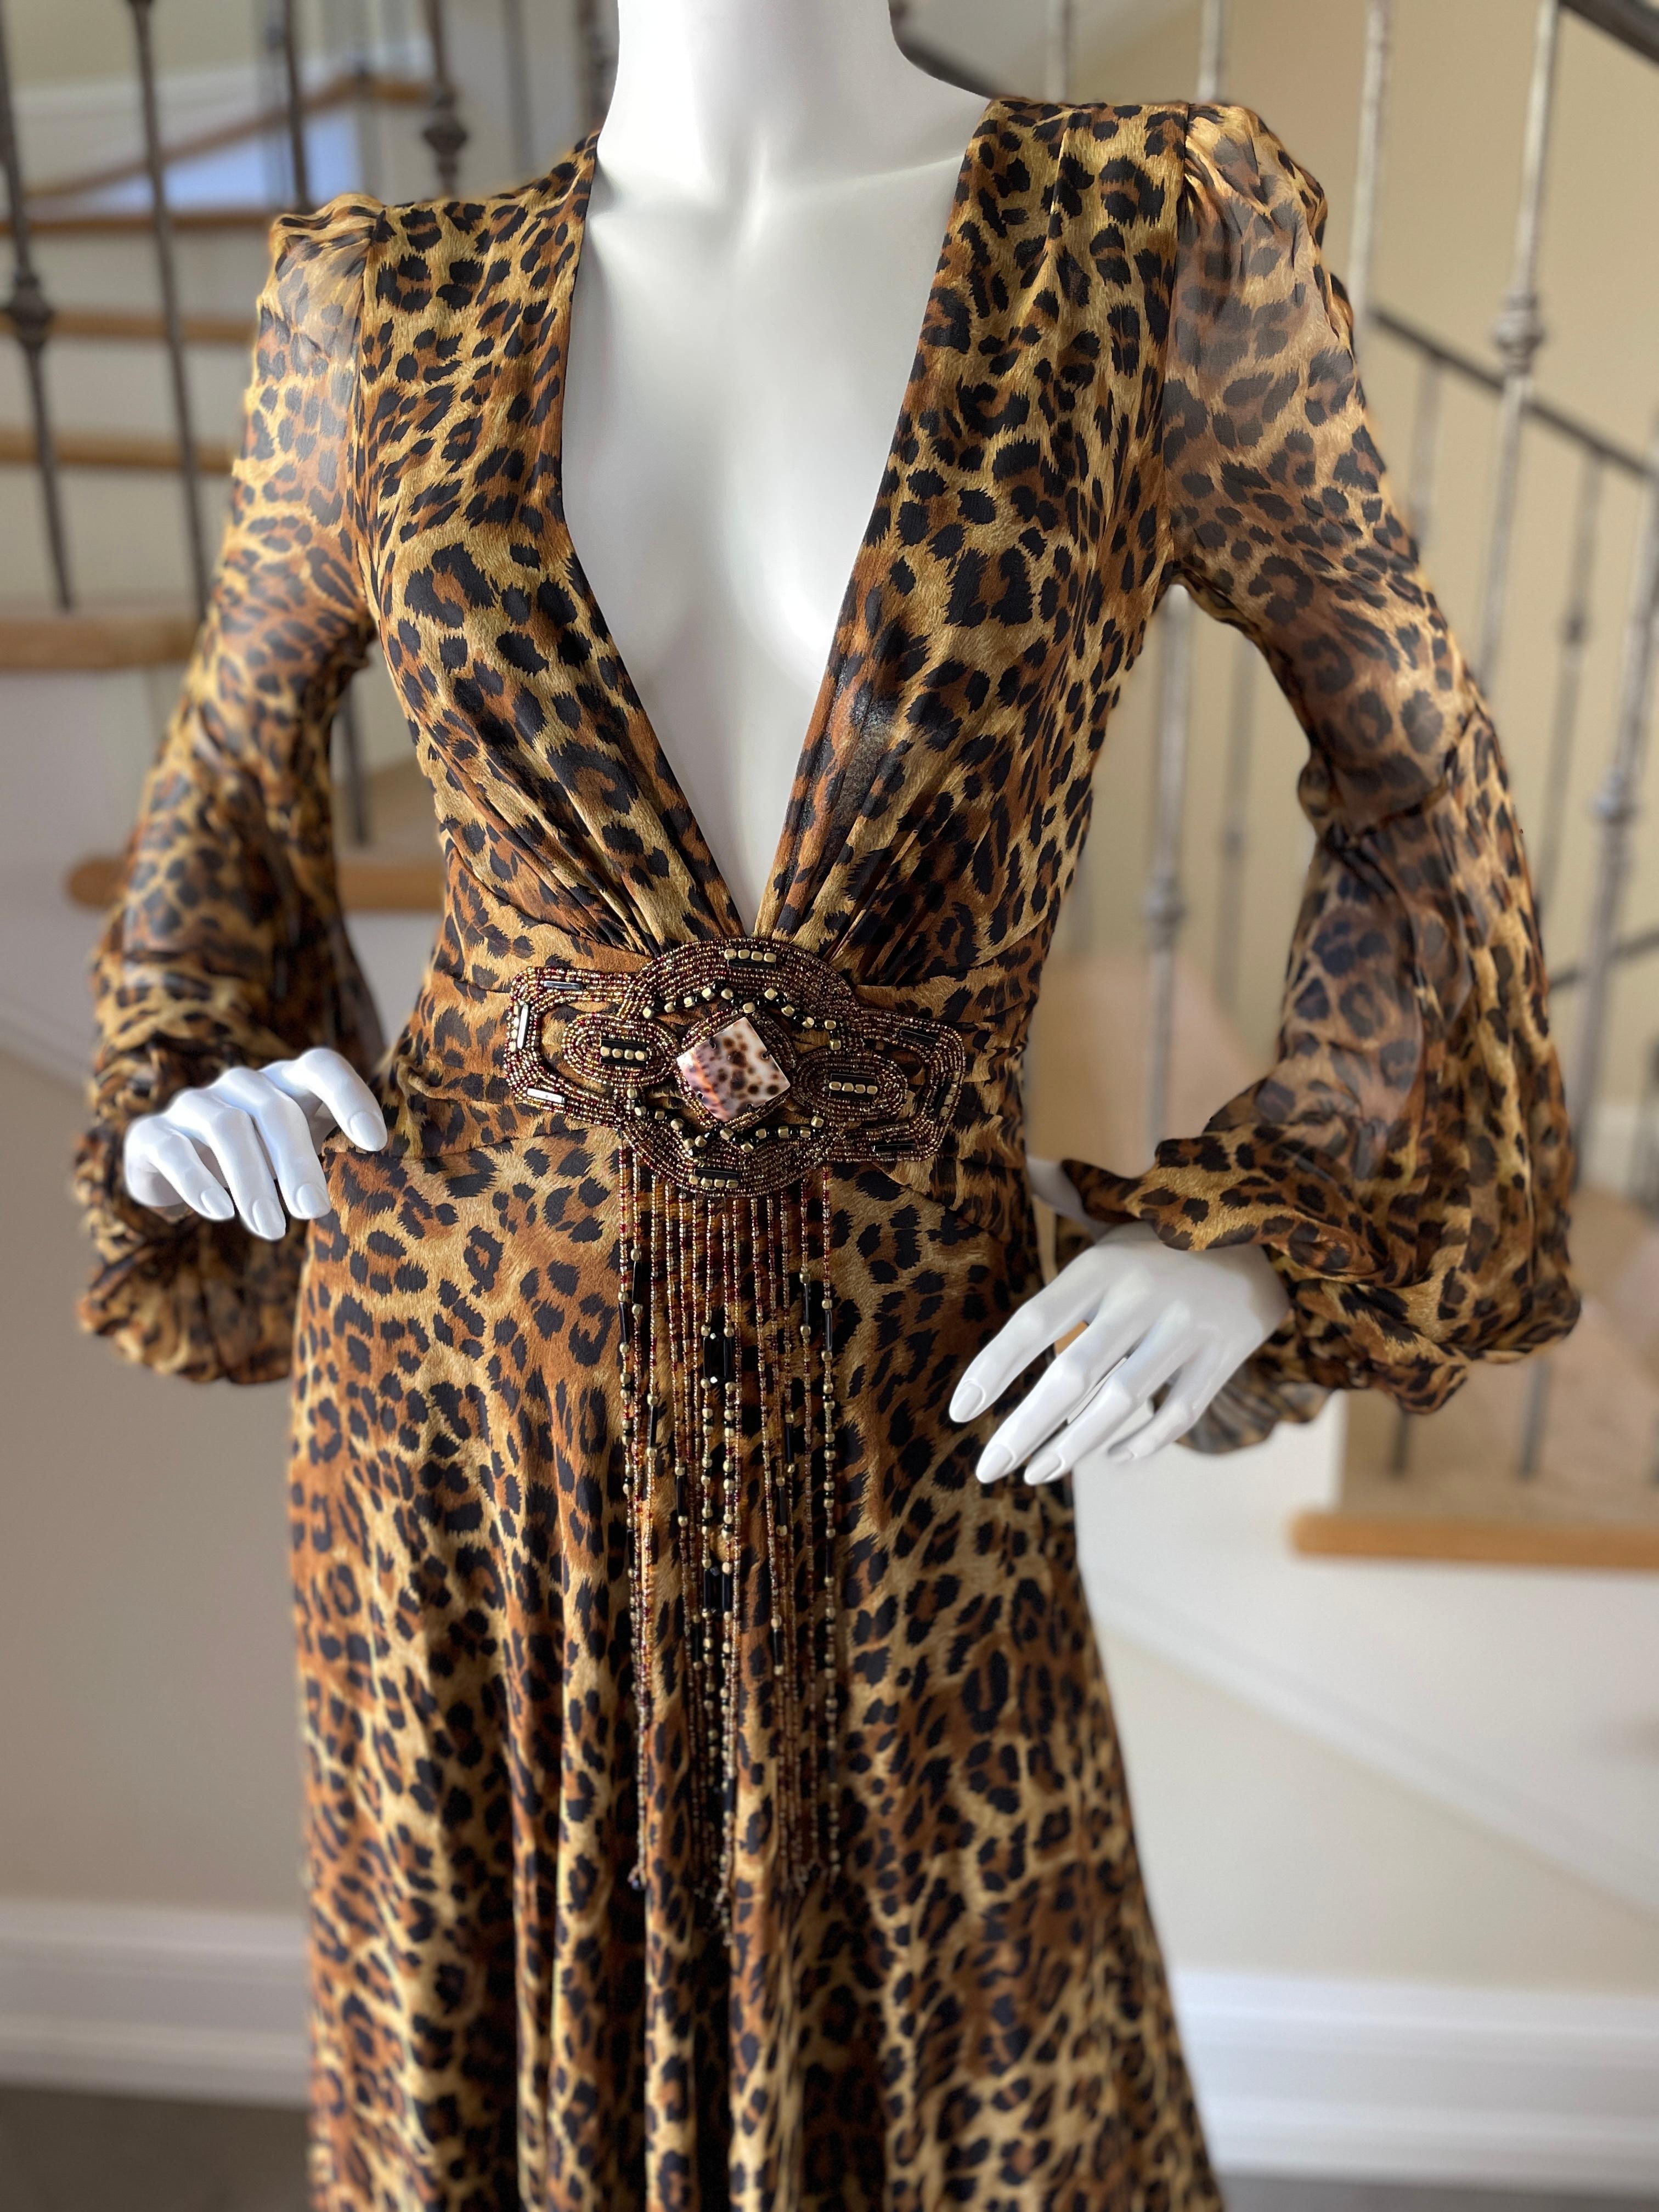 Jenny Packham 2007 Silk Leopard Print Plunging Embellished Evening Dress Sz 10UK In New Condition For Sale In Cloverdale, CA